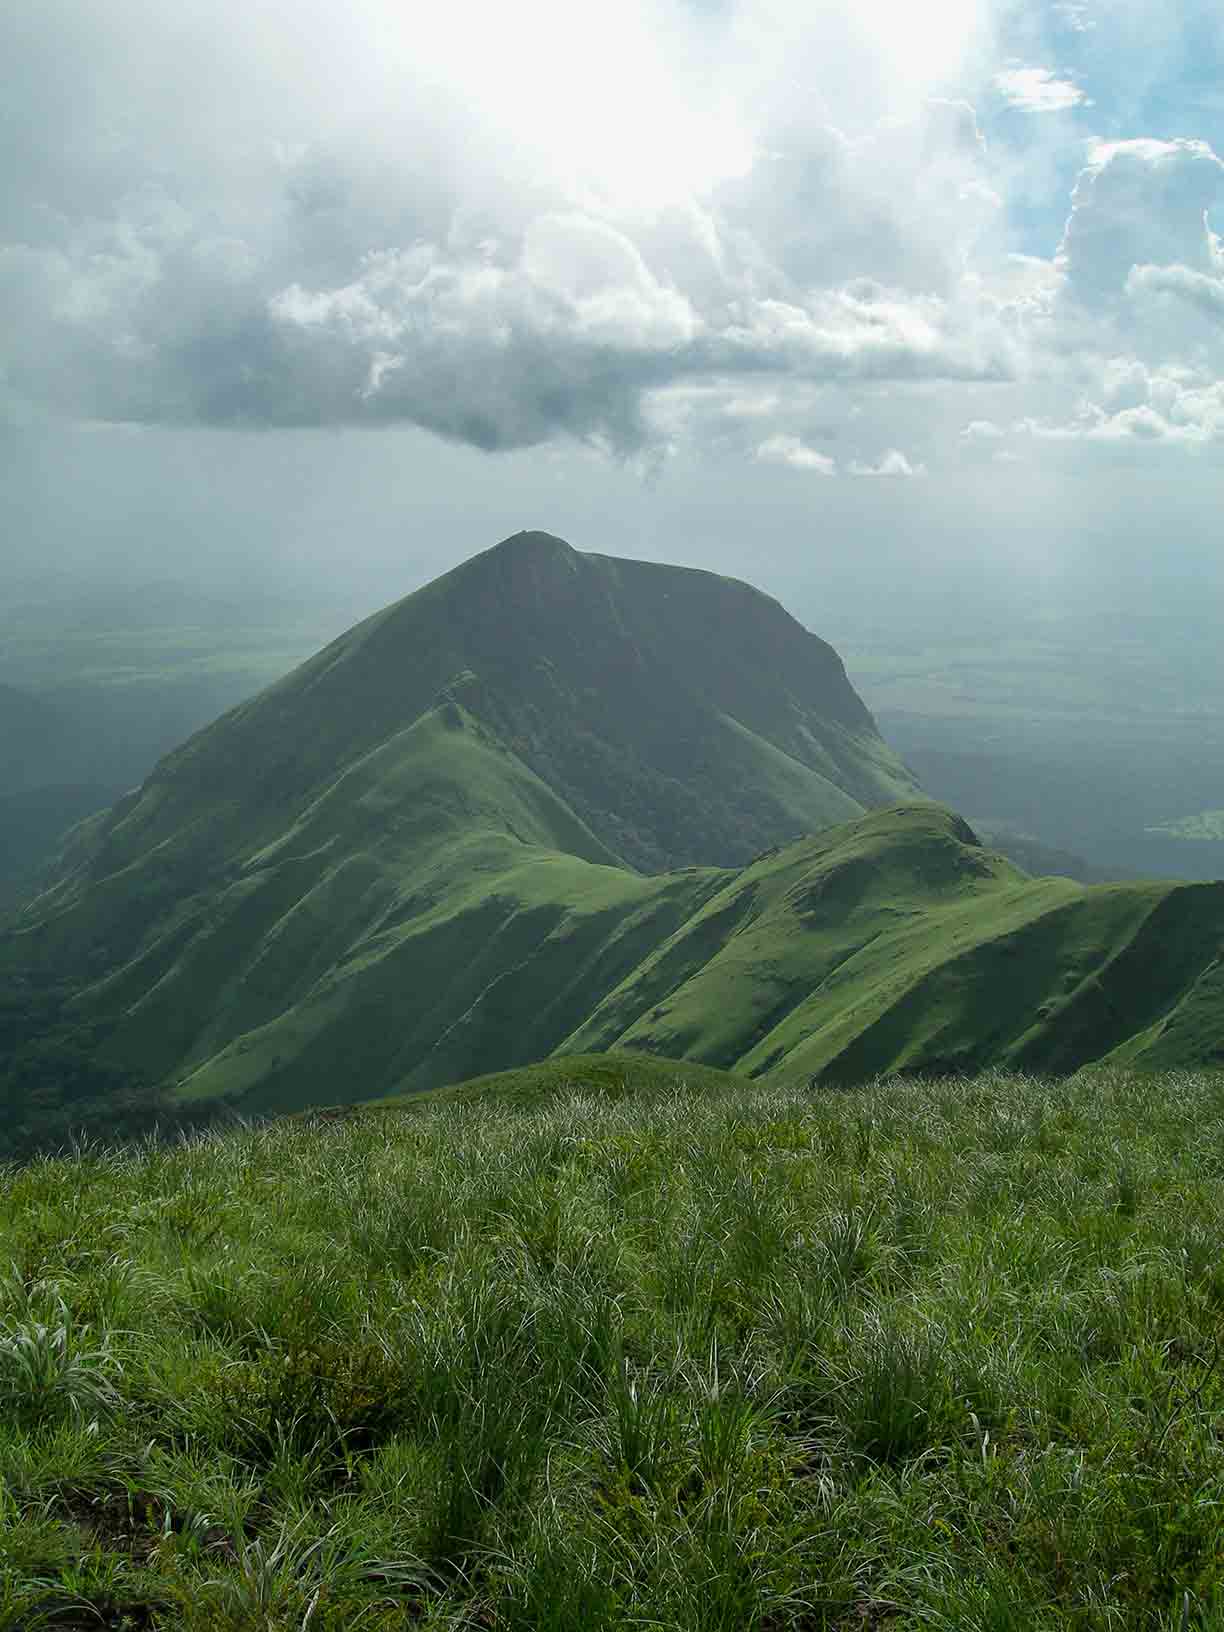 Mount Nimba the border of Ivory Coast and Guinea in West Africa